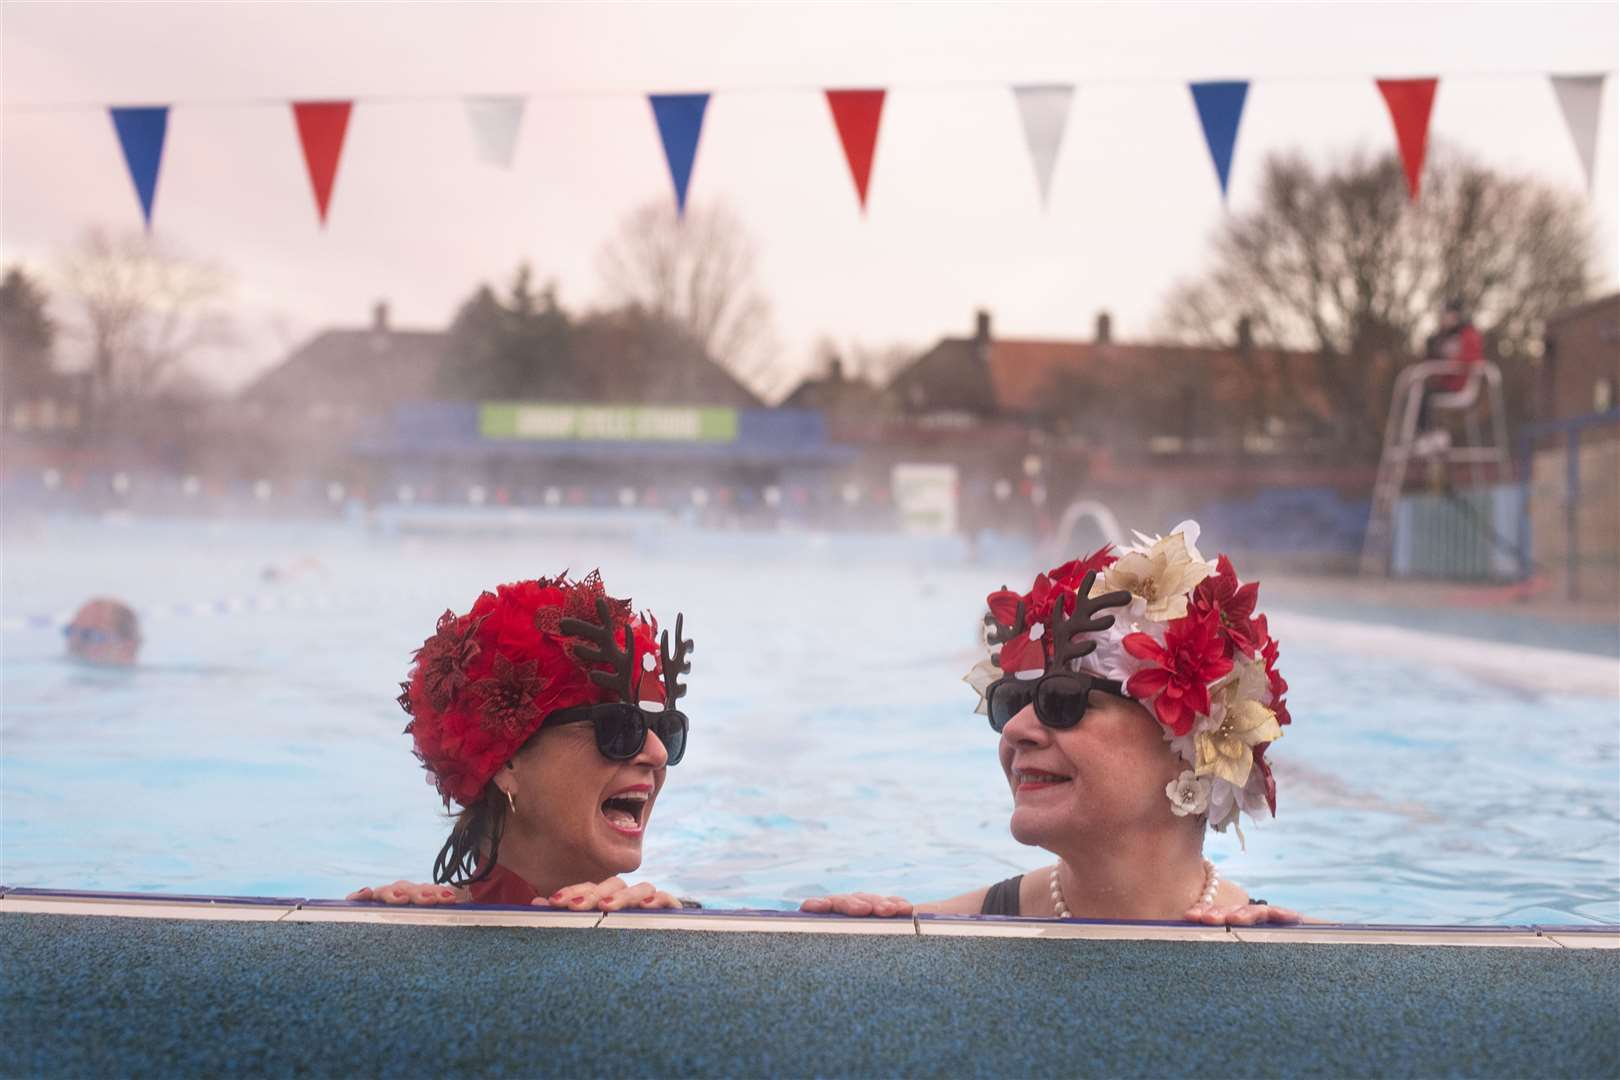 Jessica Walker and Nicola Foster, known as the Lido Ladies, swim at Charlton Lido in Hornfair Park, London, on its first day of reopening (Victoria Jones/PA)